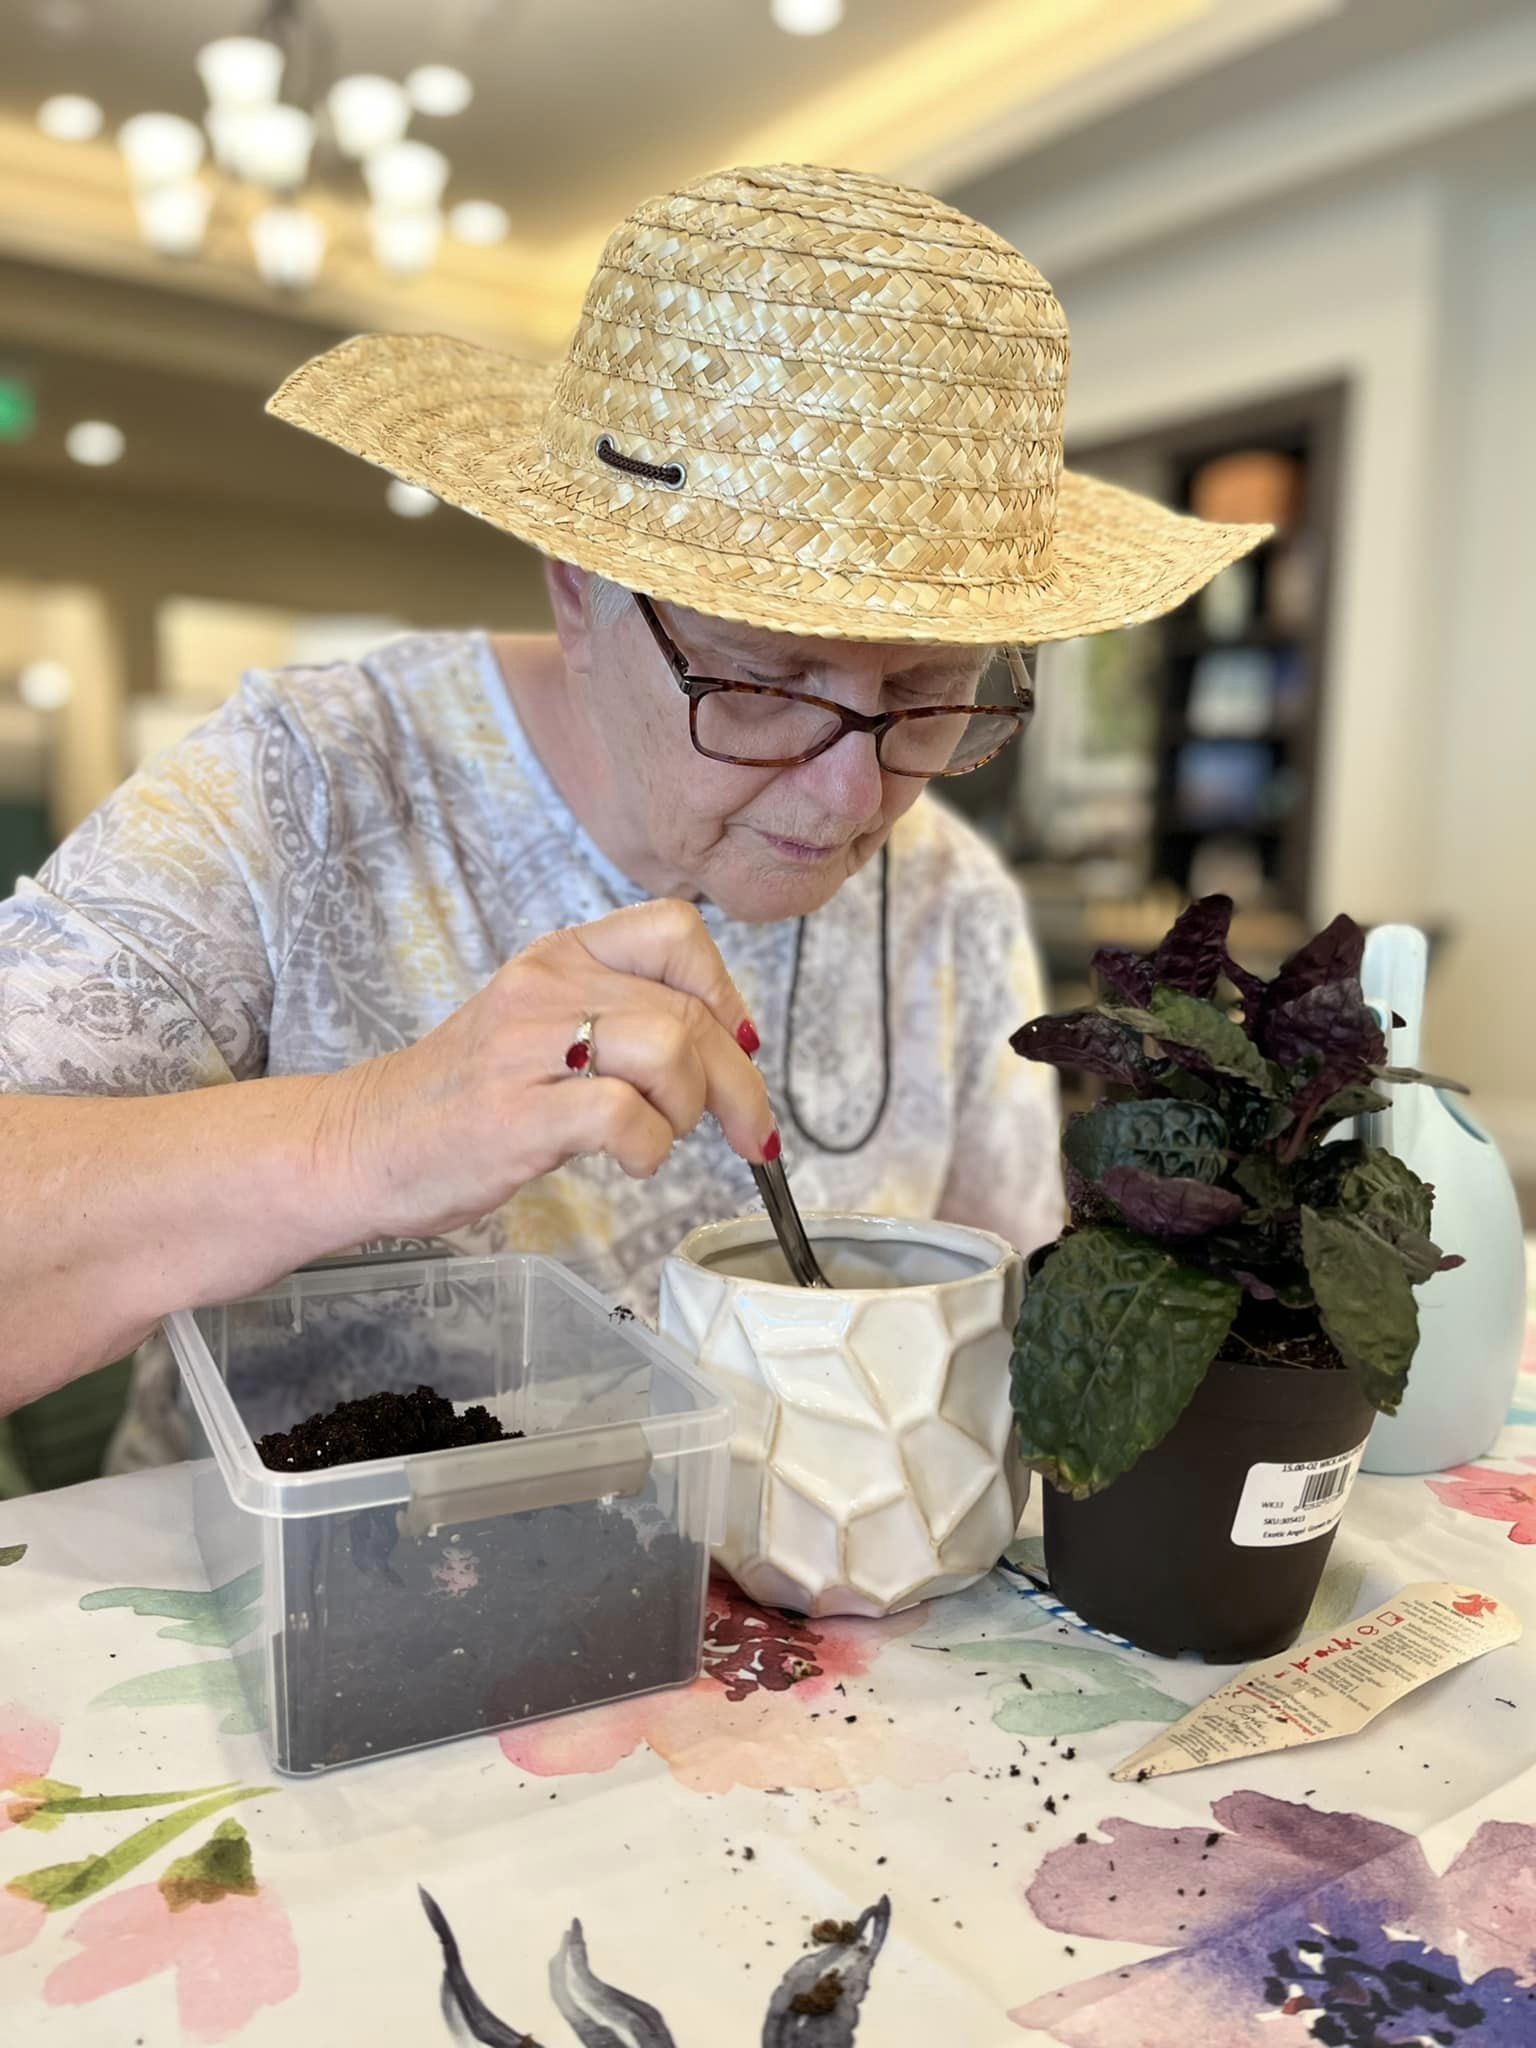 Silverado resident planting flowers during activities